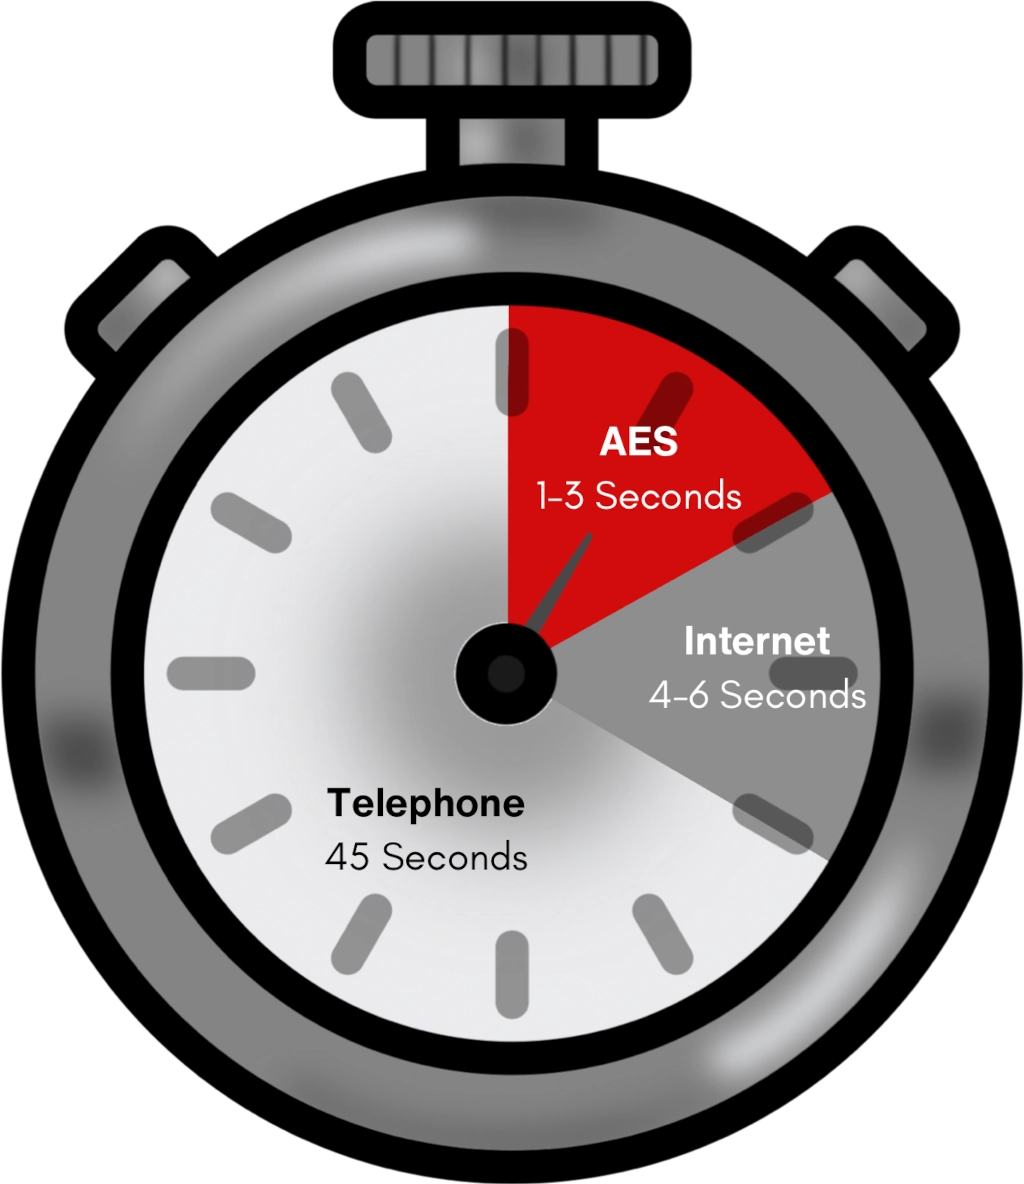 AES Corporation stopwatch: AES = 1-3 Seconds; Internet = 4-6 Seconds; Telephone = 45 Seconds